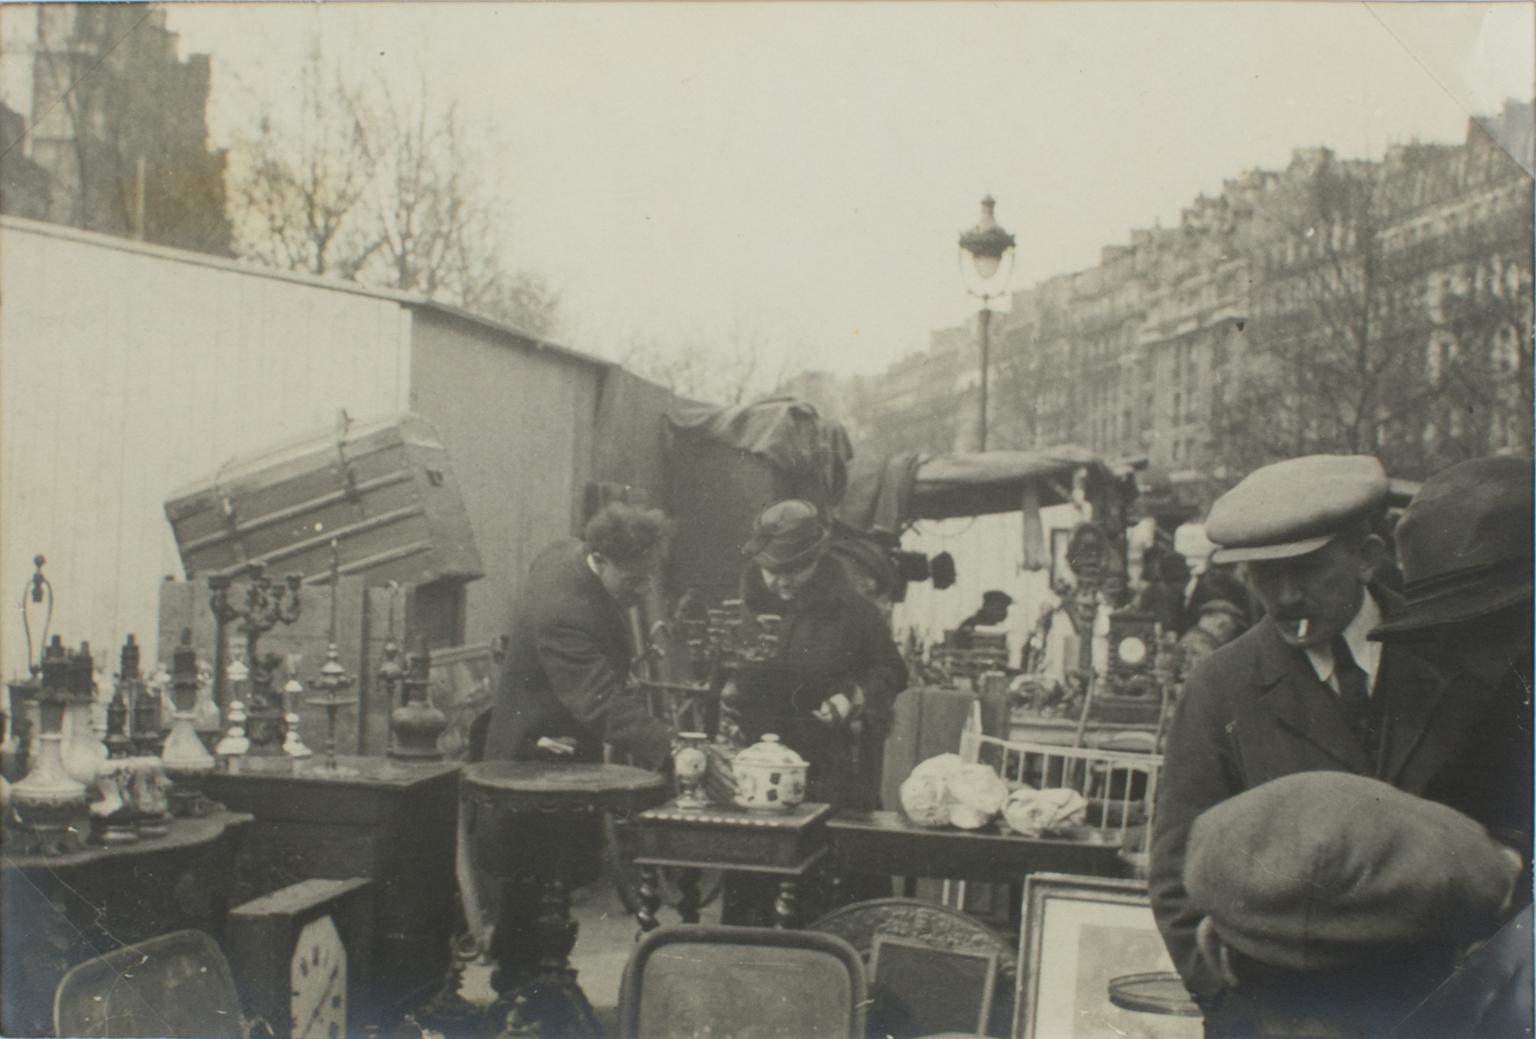 Unknown Landscape Photograph - Outdoor Antique Show in Paris  - Silver Gelatin Black and White Photograph